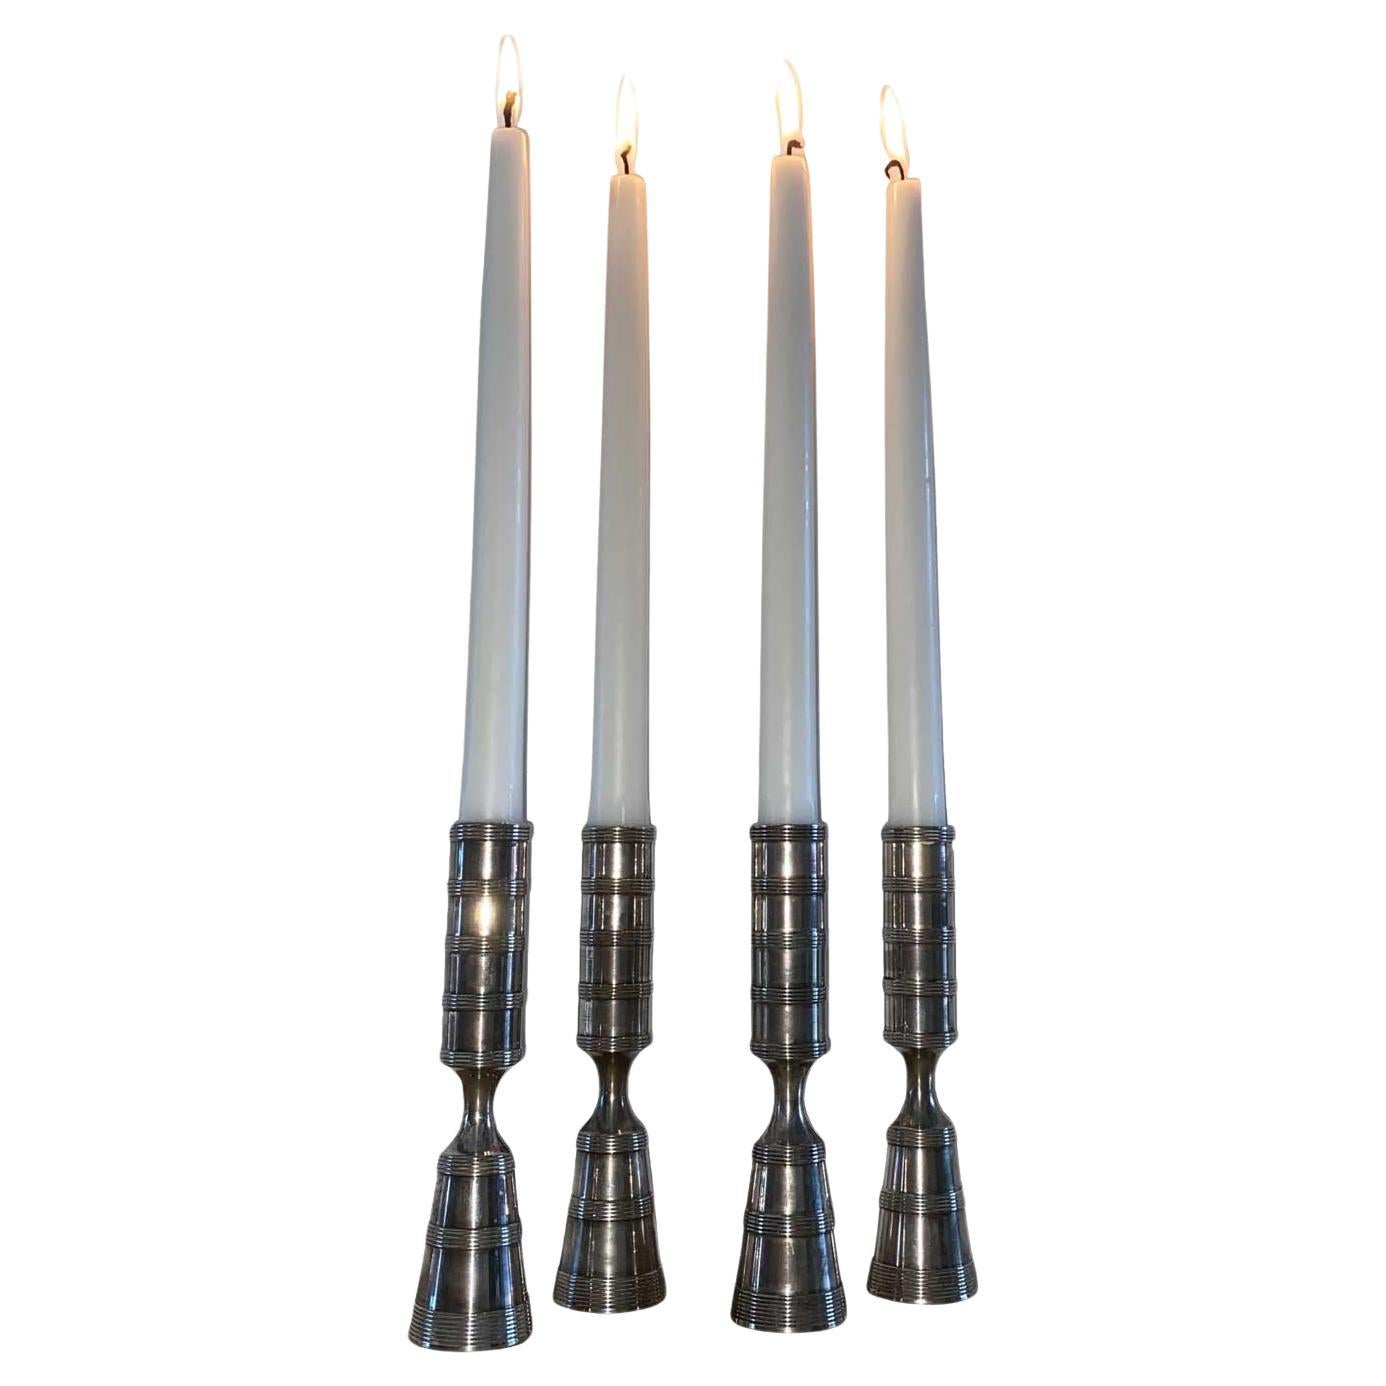 Jens H Quistgaard set of 4 candlesticks in silver metal For Sale